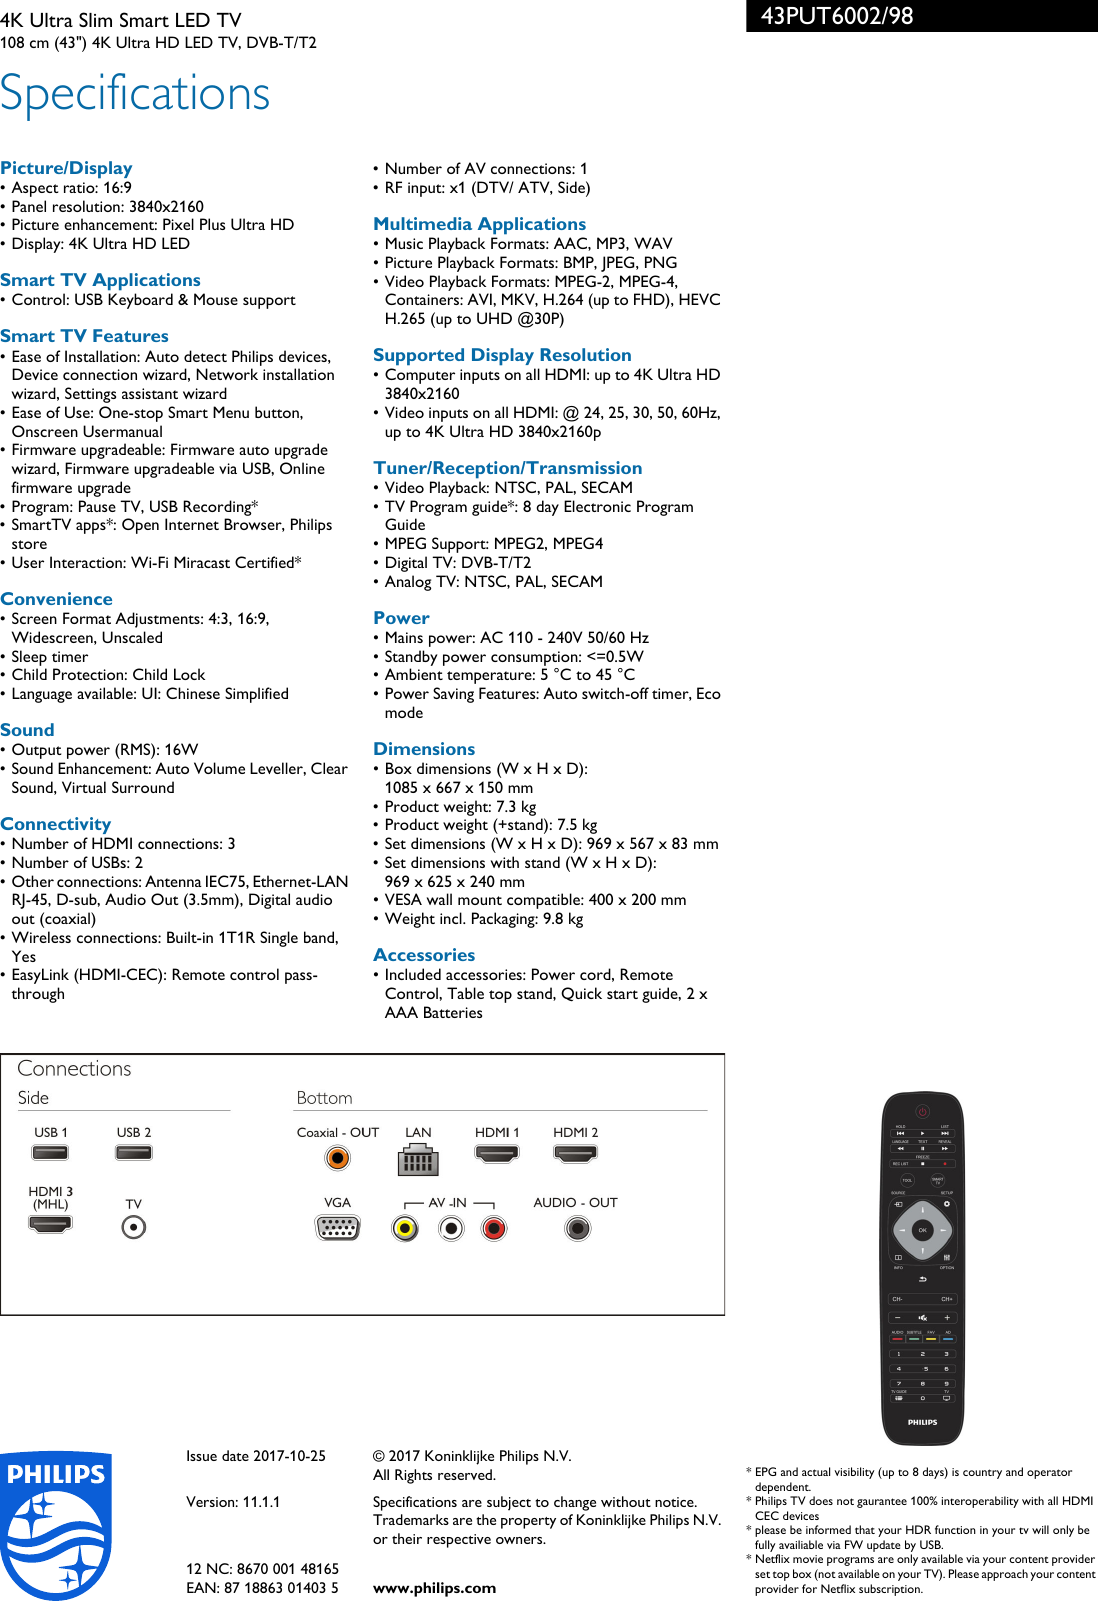 Page 3 of 3 - Philips 43PUT6002/98 4K Ultra Slim Smart LED TV With Pixel Plus HD User Manual Leaflet 43put6002 98 Pss Engsg